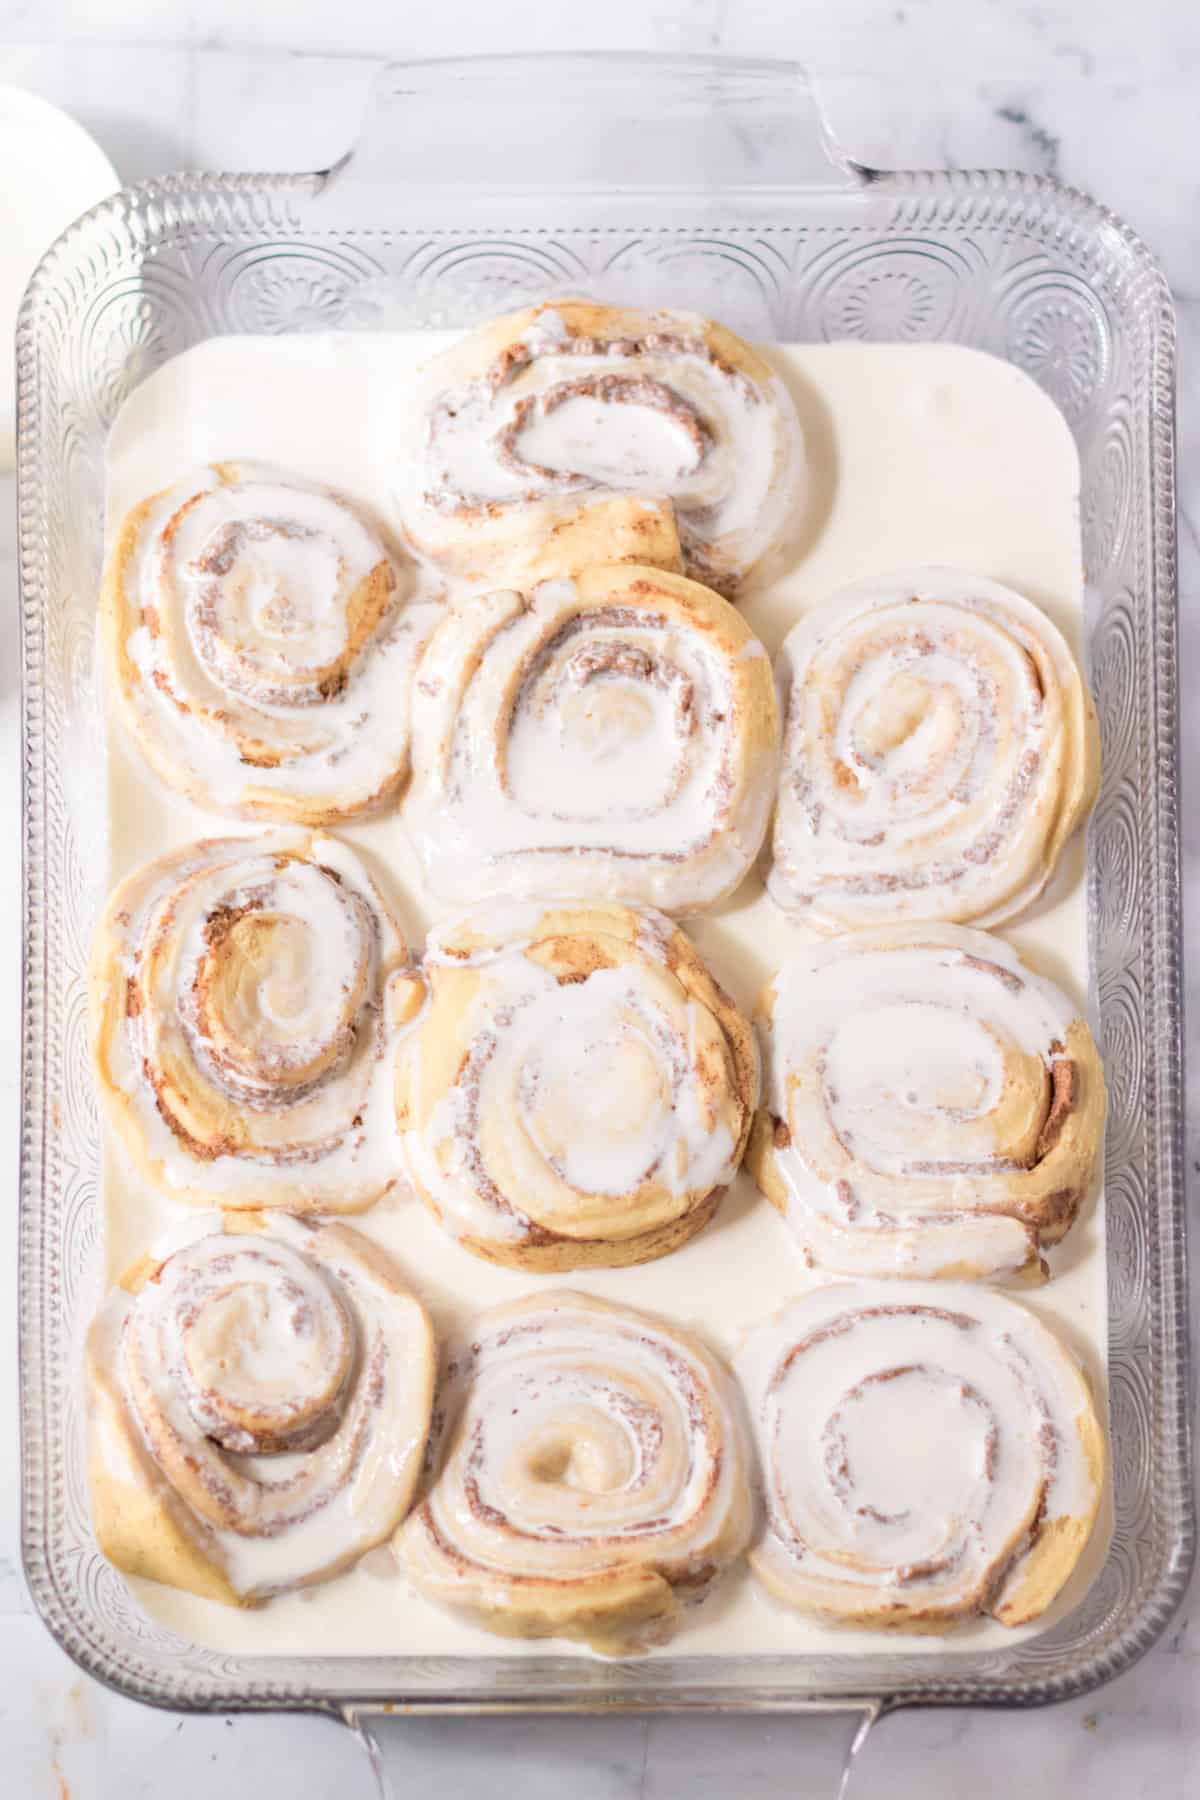 Cinnamon rolls in glass baking dish with heavy cream poured over them.